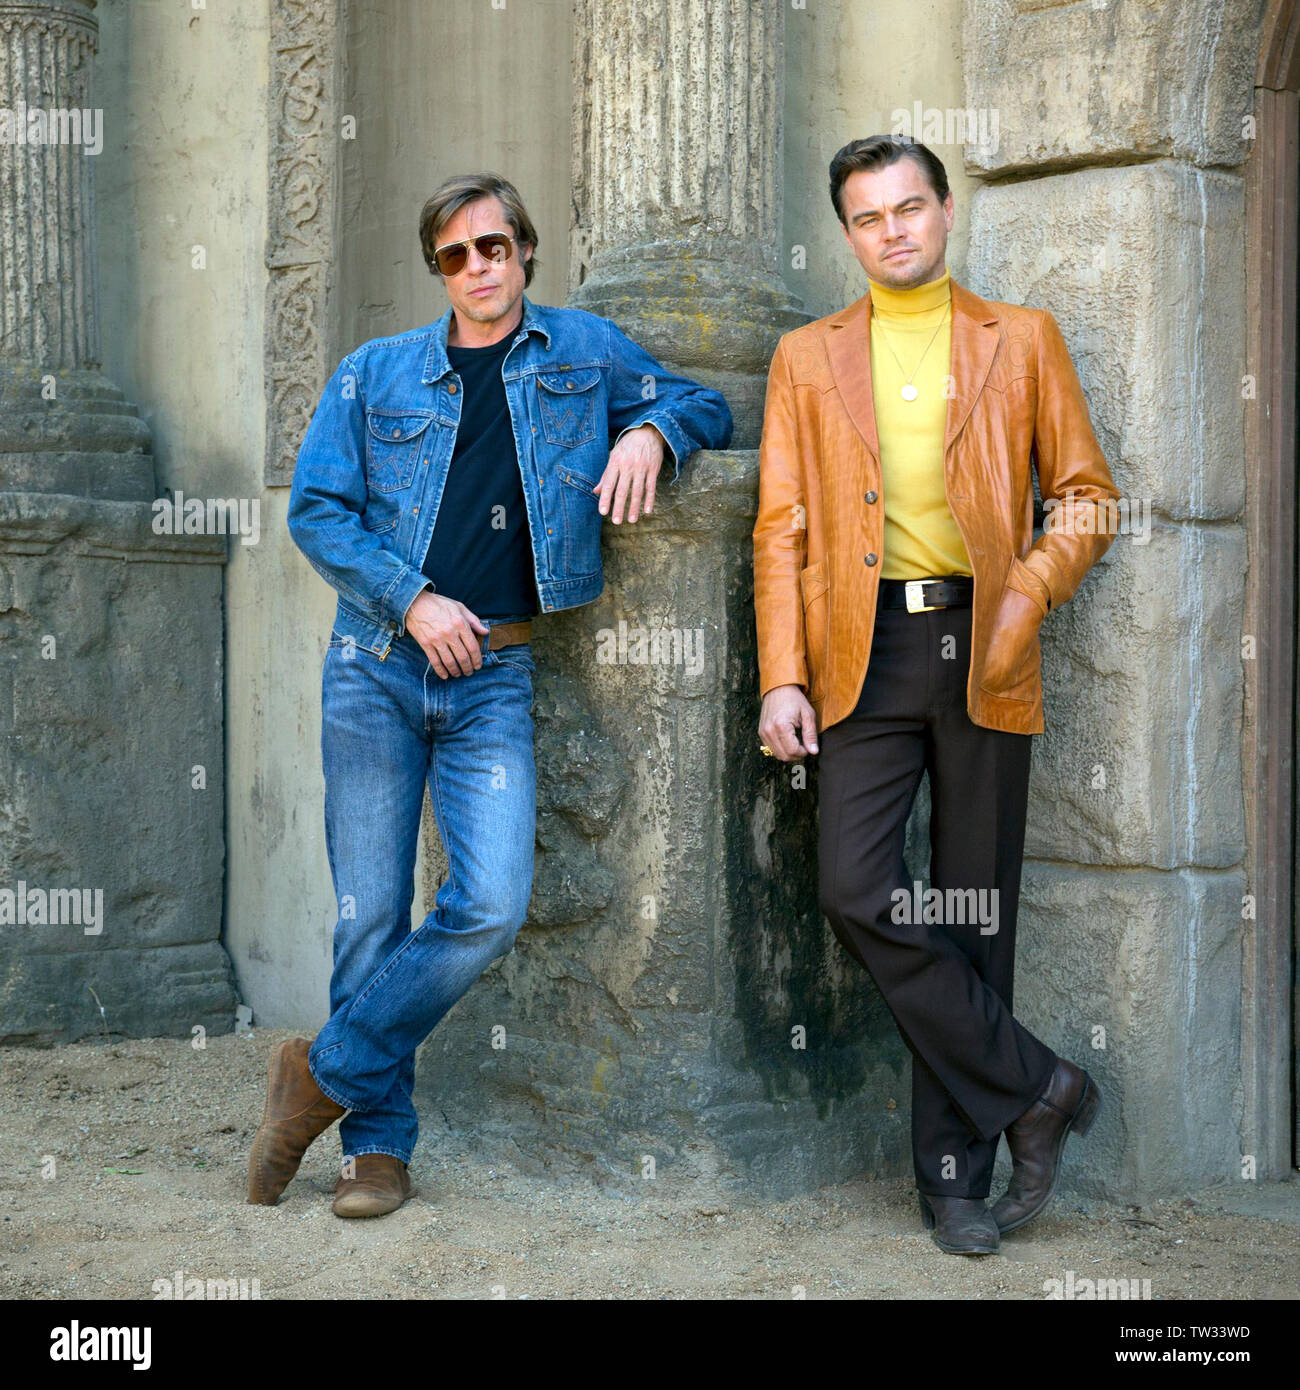 Once Upon a Time ... in Hollywood (2019) directed and written by Quentin Tarantino and starring Brad Pitt as Cliff Booth a TV actor and Leonardo DiCaprio as Rick Dalton, his stunt double. Stock Photo